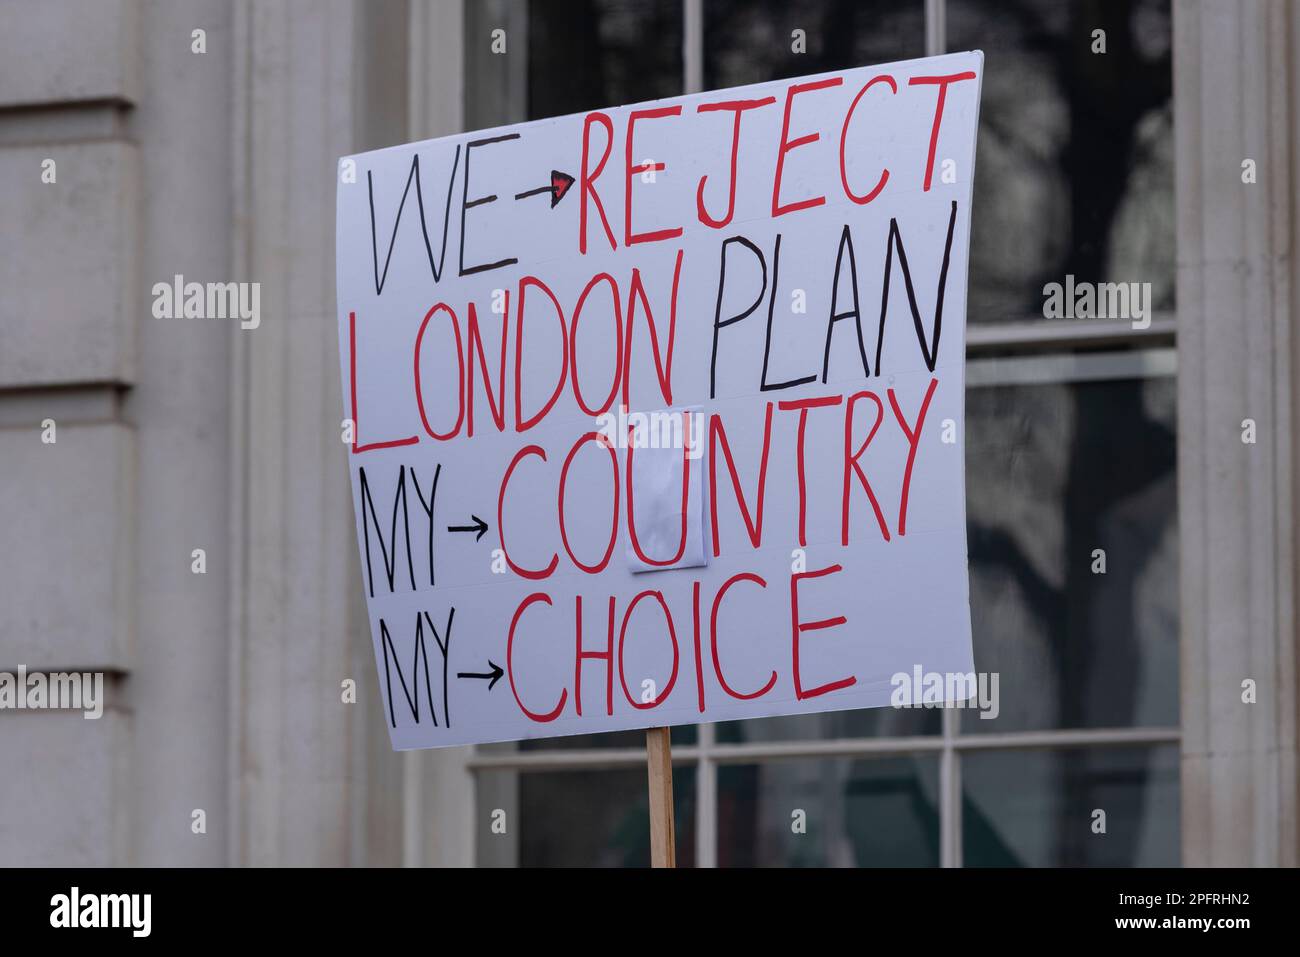 Whitehall, Westminster, London, UK. 18th Mar, 2023. A protest is taking place outside Downing Street in support of former Pakistan prime minister Imran Khan, and against Nawaz Sharif who is living in London. Placard, stating We reject London Plan, my country, my choice Stock Photo